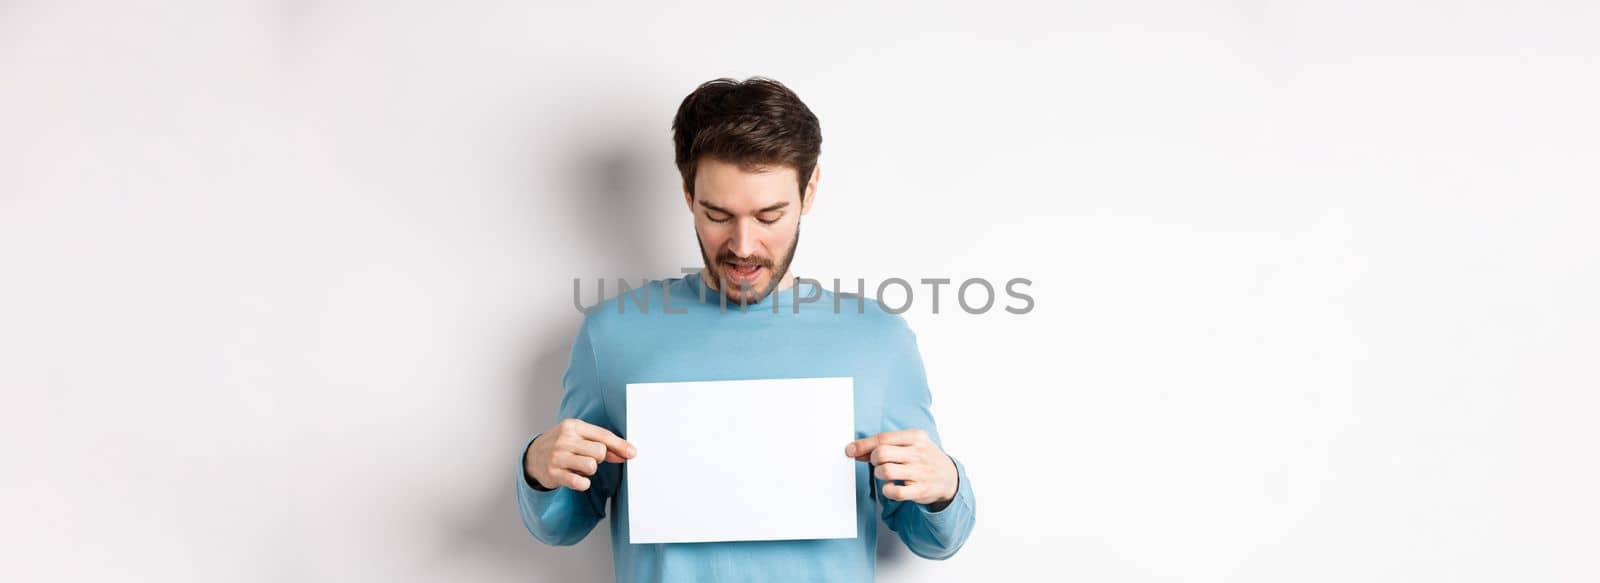 Excited bearded guy reading banner on blank piece of paper, showing logo, standing over white background.